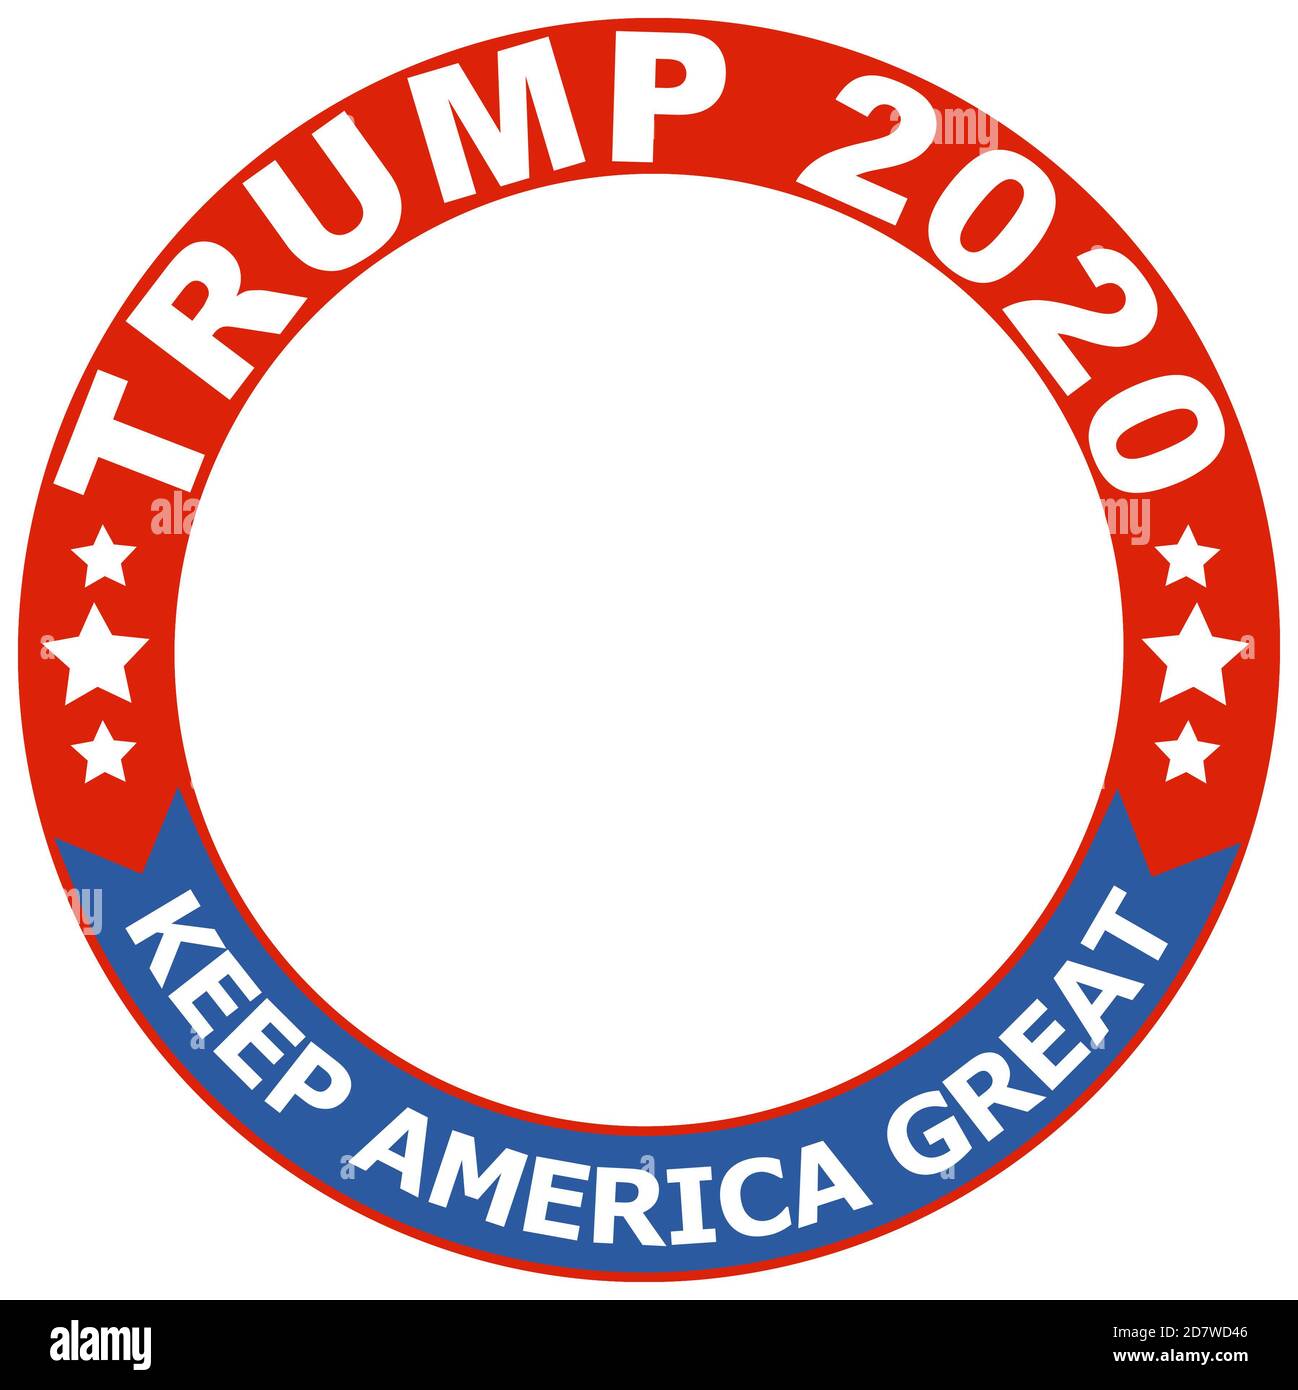 Trump 2020 round circle seal frame, Keep America Great red blue vote slogan, voting election for president, politics, political campaign, graphic illu Stock Photo